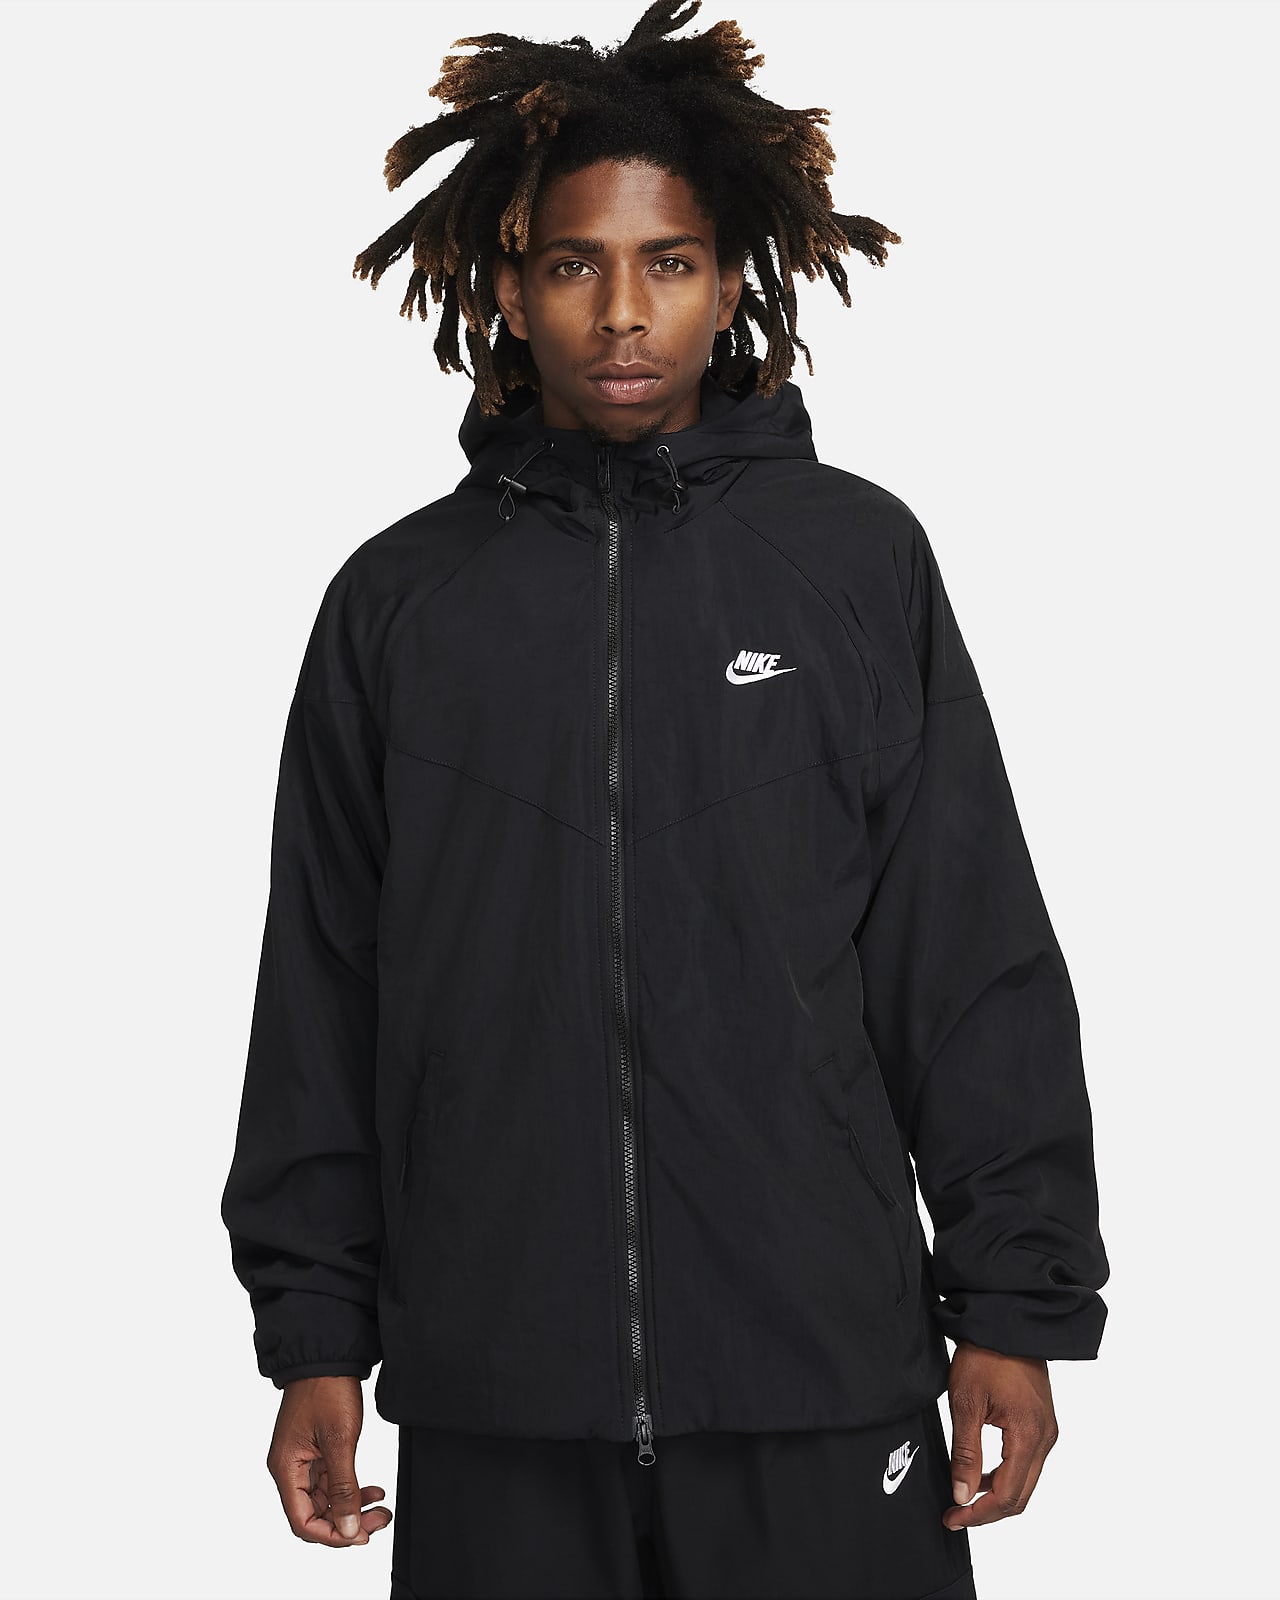 https://static.nike.com/a/images/t_PDP_1280_v1/f_auto,q_auto:eco/57d81a2c-d6c2-4daa-bf40-4fb7a2b5bc63/veste-a-capuche-ample-sportswear-windrunner-pour-vqnfHS.png